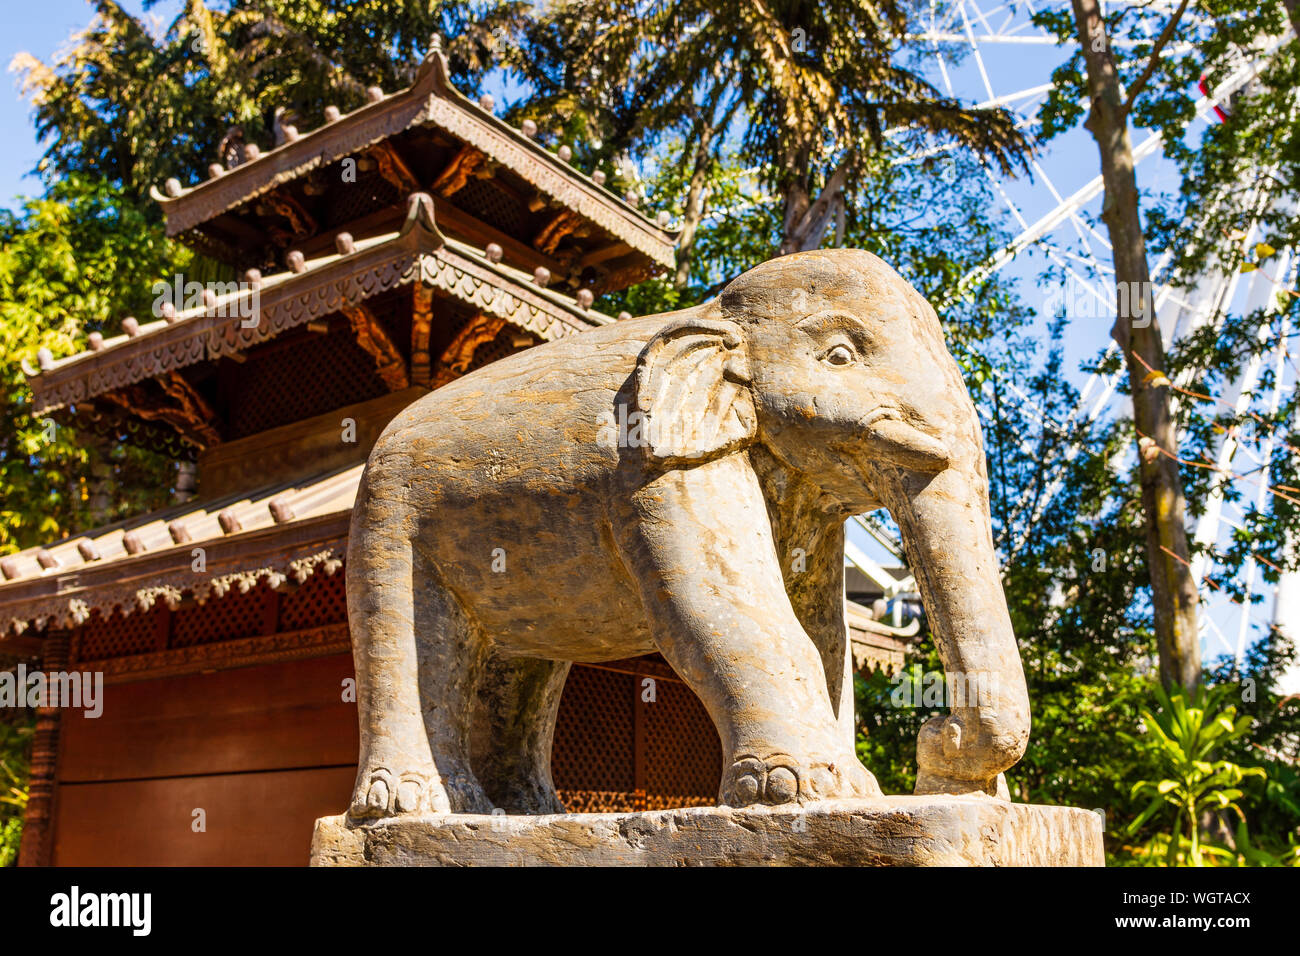 A Stone Elephant Statue out the front of a Temple. Stock Photo